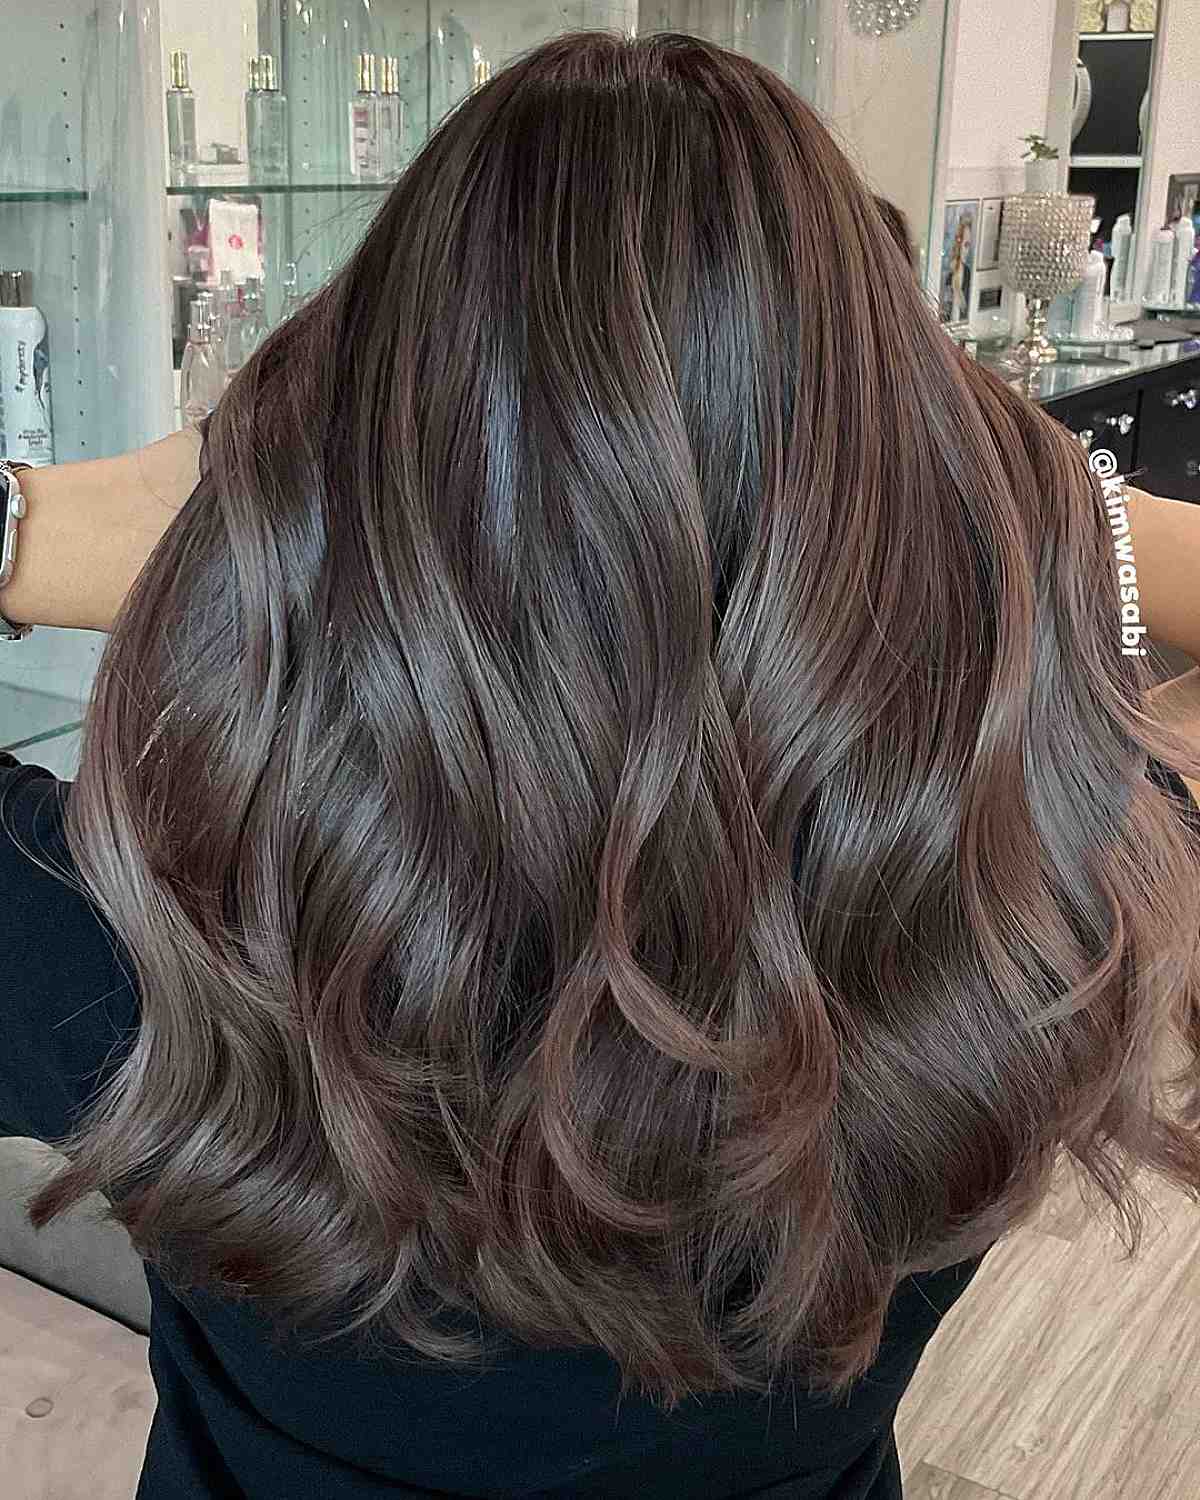 Romantic long brown hair with soft curls